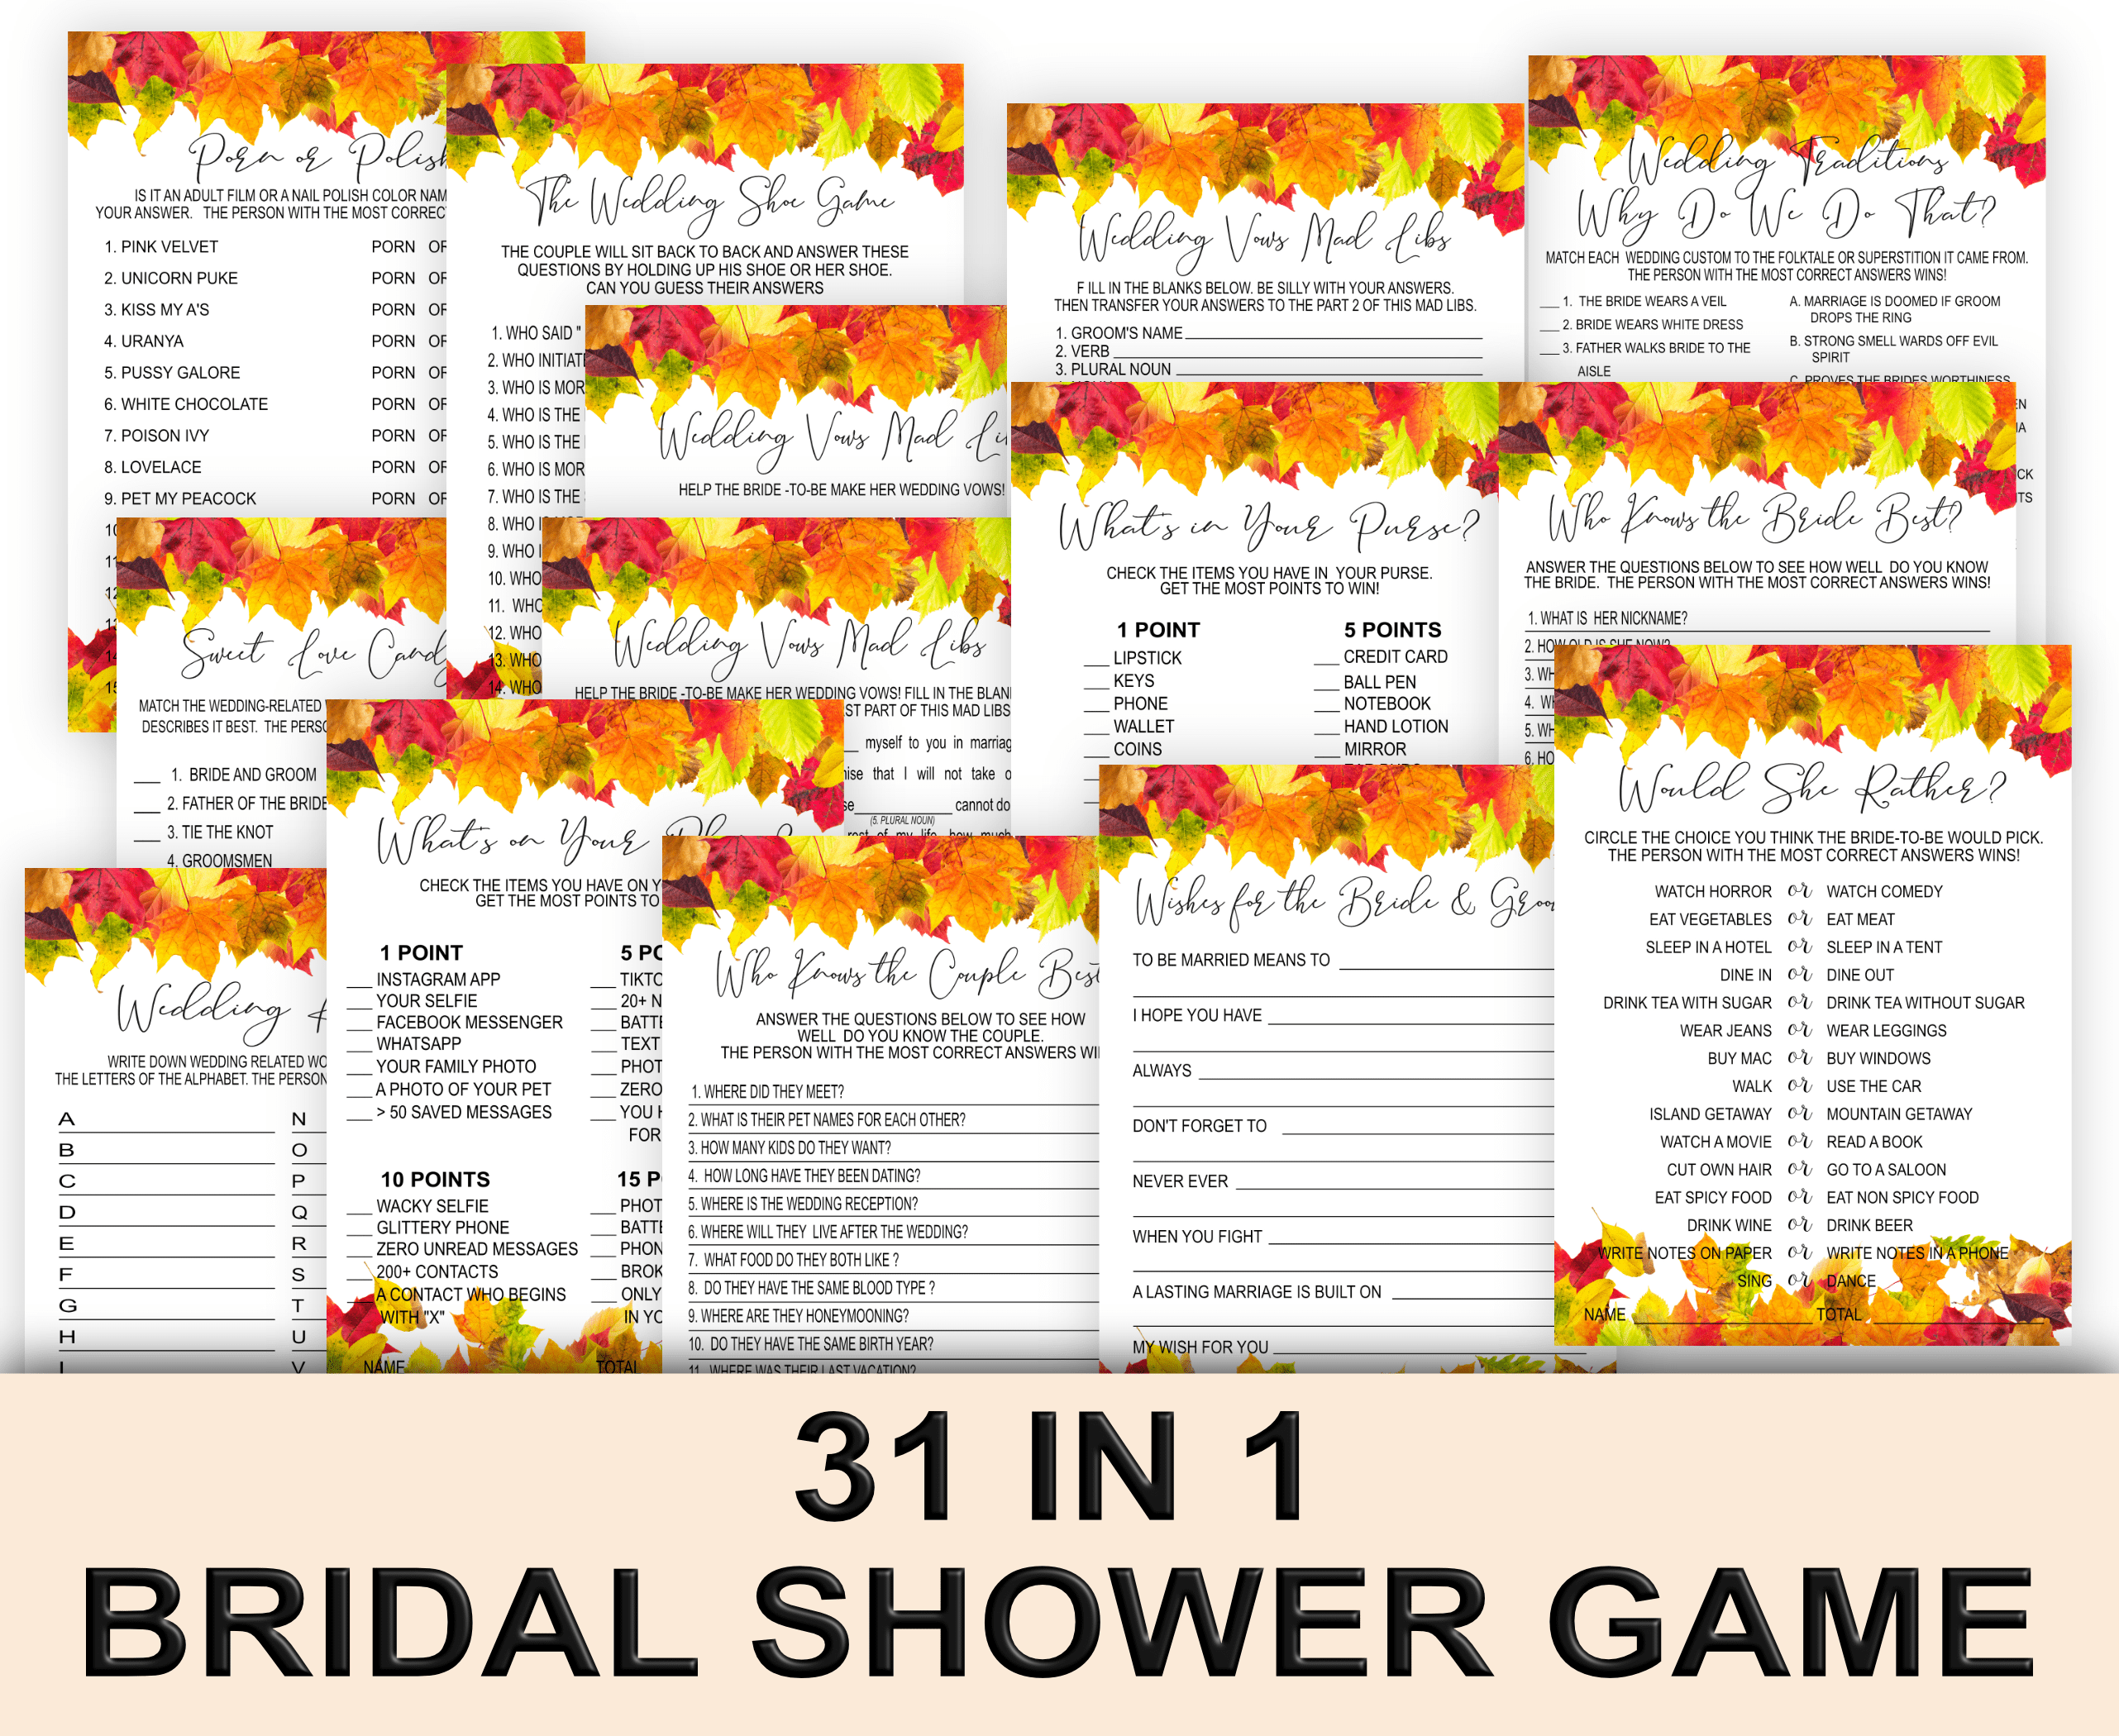 BRIDAL SHOWER Autumn Bridal Shower Games Bundle with 31 Fun and Festive Games Printable Affordable bridal shower games